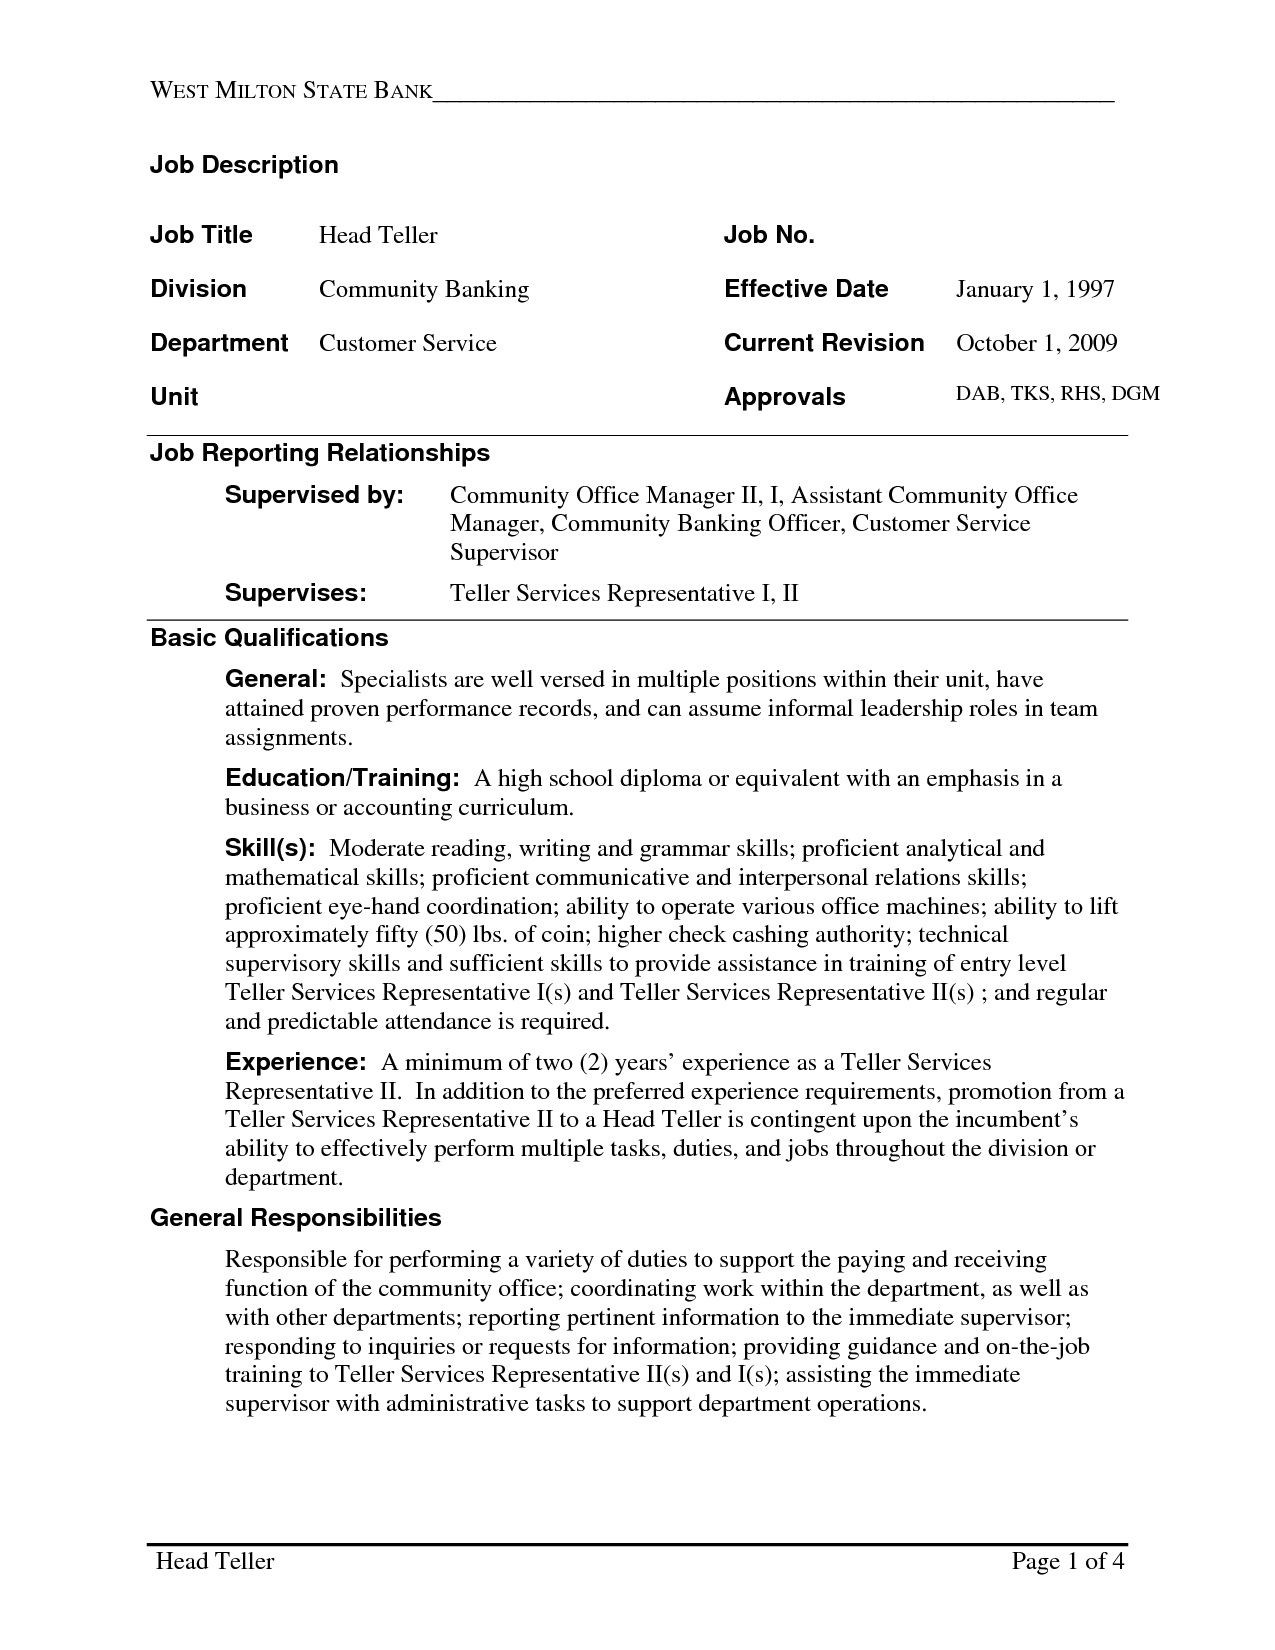 Sample Resume for Bank Teller with Experience Bank Teller Resume with No Experience Latest Resume format